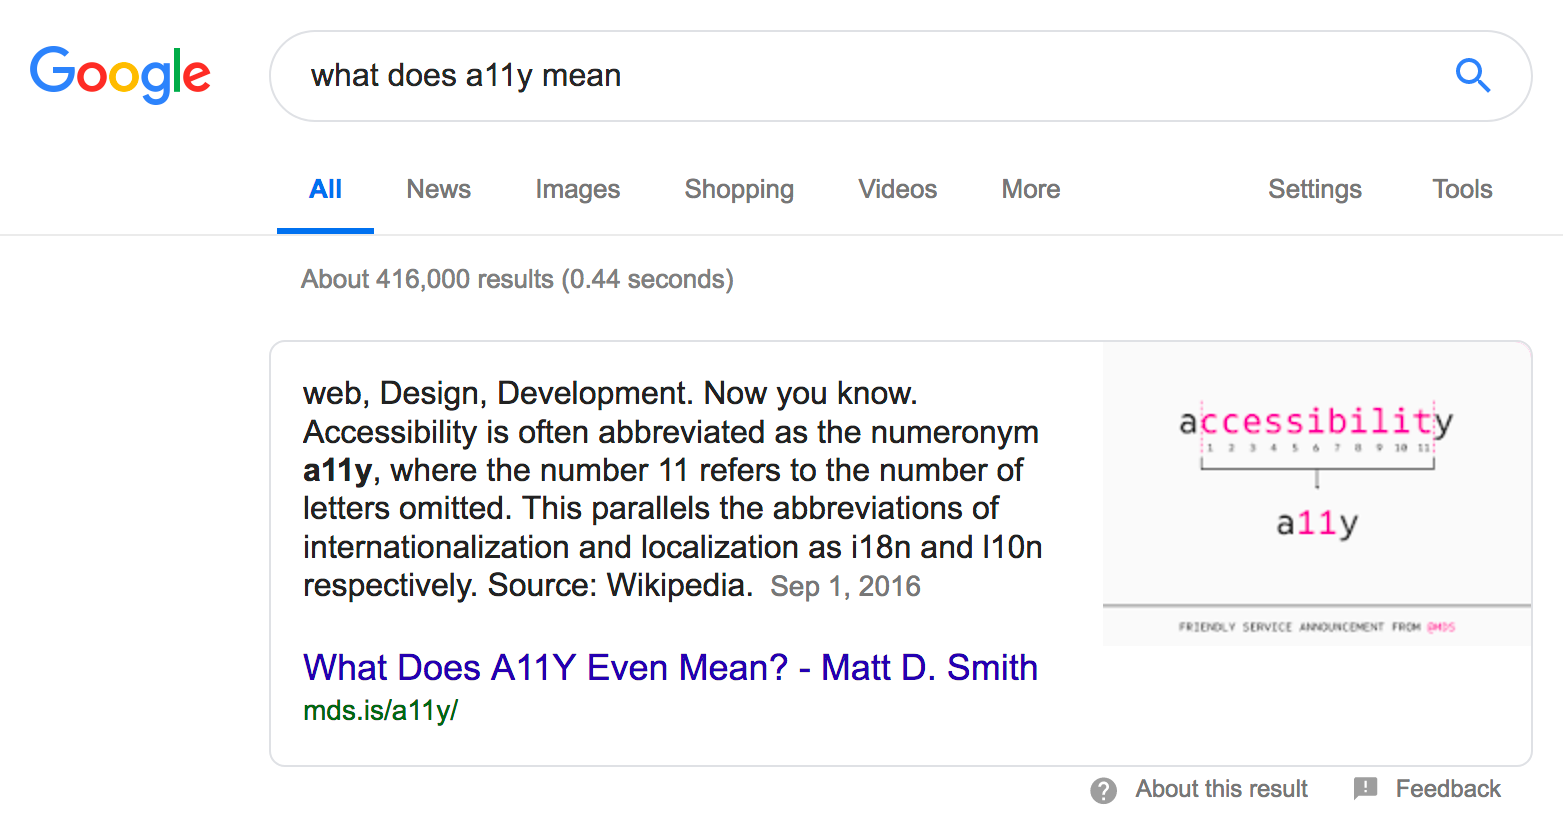 Google search results for, “what does a11y mean”. The first result a structured data reply, taken from Wikipedia and the article, “What Does A11Y Even Mean?” by Matt D. Smith. It’s description reads, “Accessibility is often abbreviated as the numeronym a11y, where the number 11 refers to the number of letters omitted. This parallels the abbreviations of internationalization and localization as i18n and l10n respectively.” The image comes from Matt D. Smith’s article and shows how the term “a11y” is formed from the word “accessibility.”.